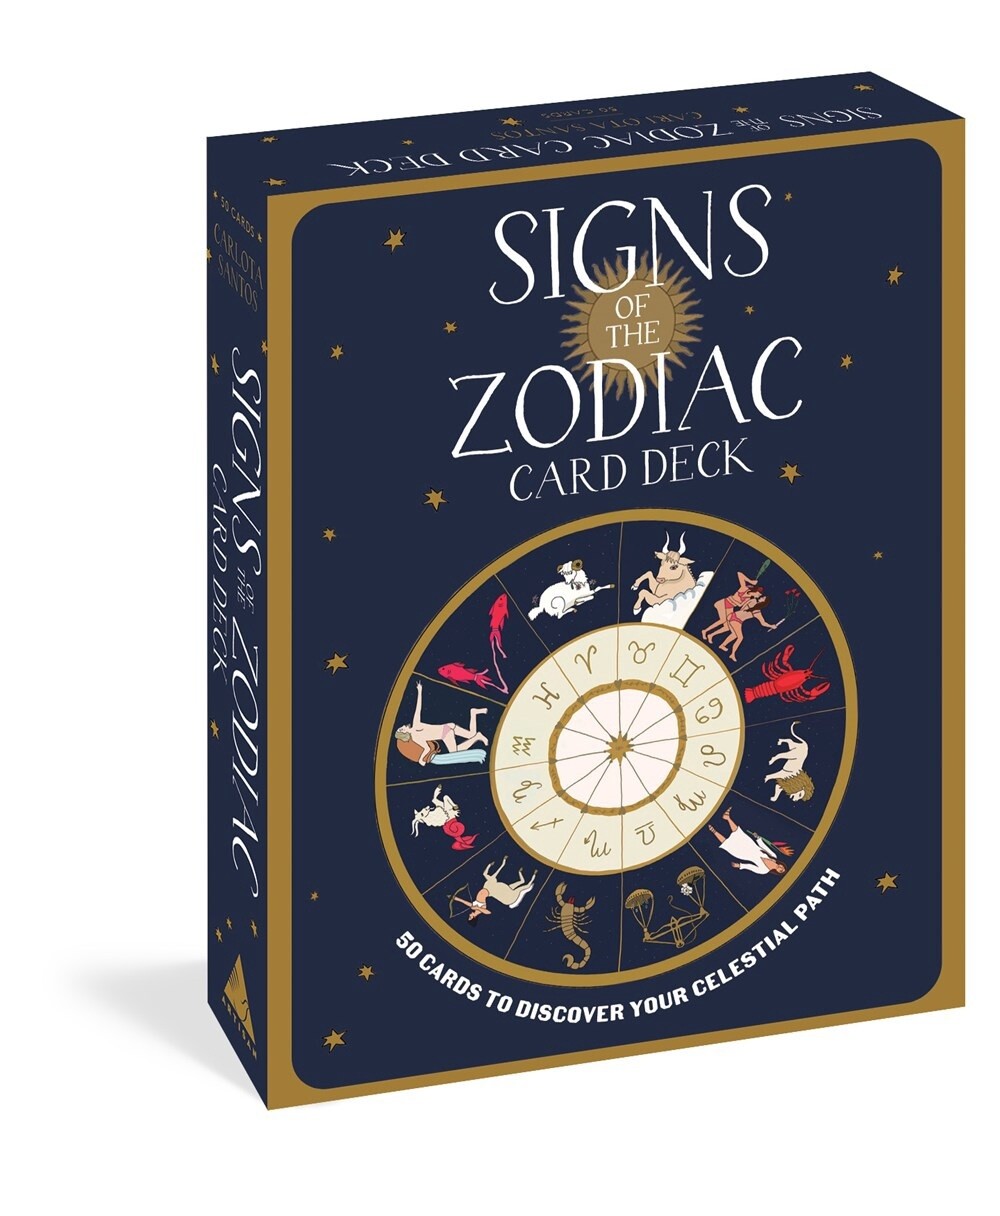 Signs of the Zodiac Card Deck: 50 Cards to Discover Your Celestial Path